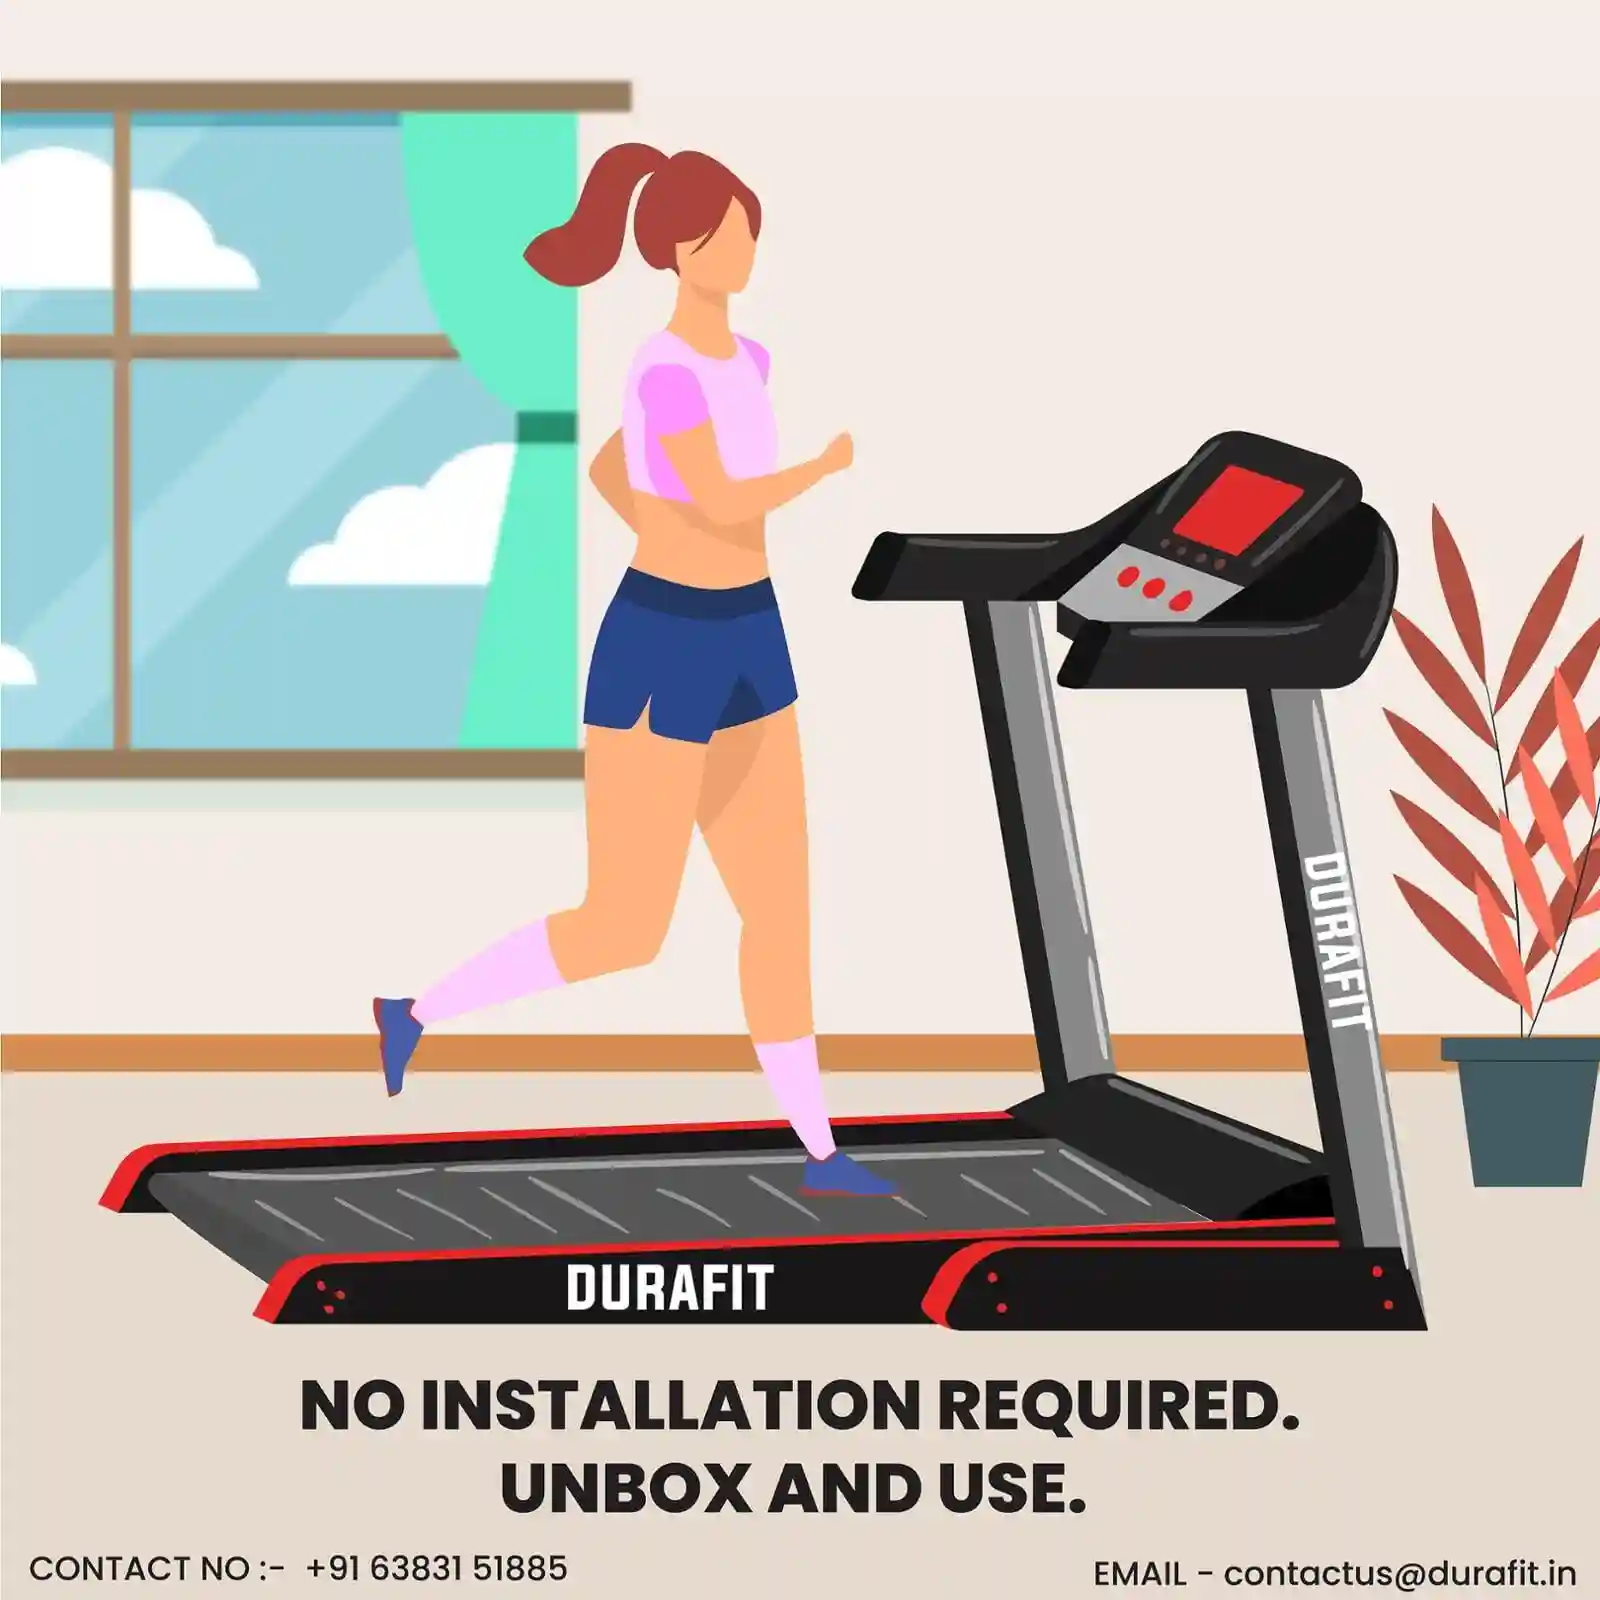 Durafit Compact Black Treadmill with no installation required